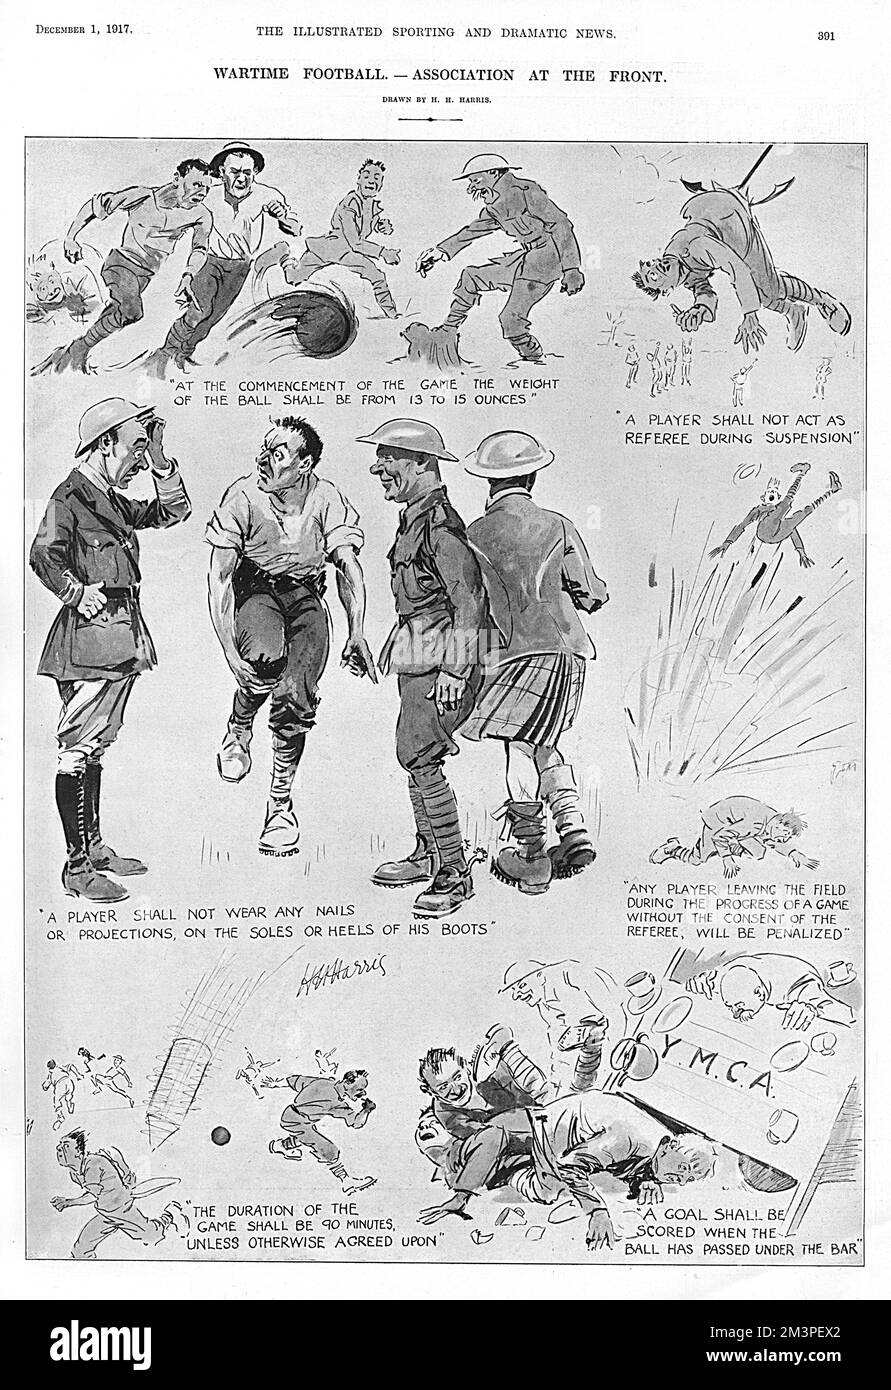 Series of humorous vignettes drawn by H. H. Harris showing the experience of playing football at the front during the First World War.  Problems encountered include a heavy ball due to all the mud it picks up, pain caused by spurs and hard boots and unanticipated shell explosions (!).  1917 Stock Photo